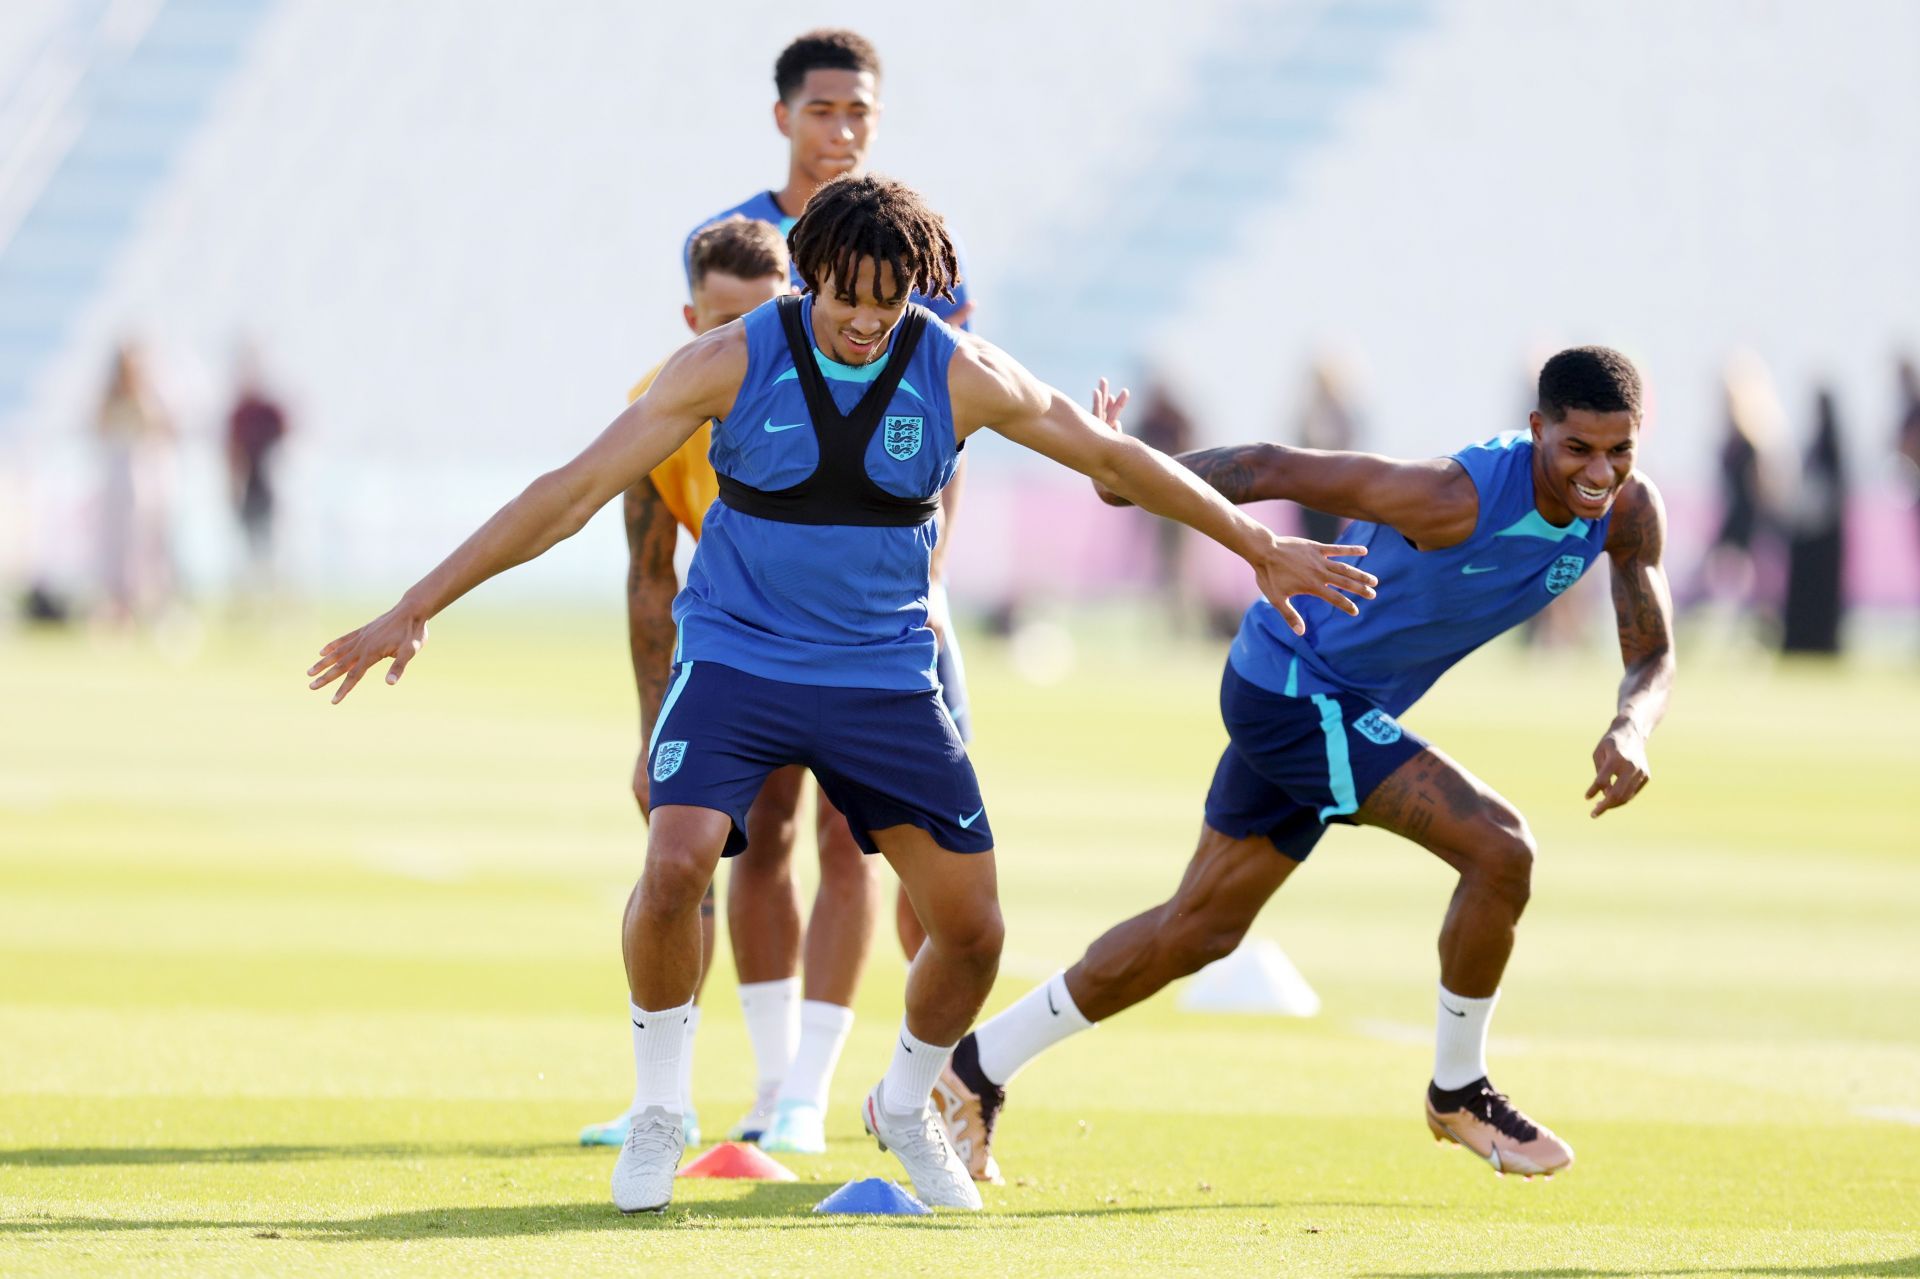 England Press Conference and Training Session - FIFA World Cup Qatar 2022